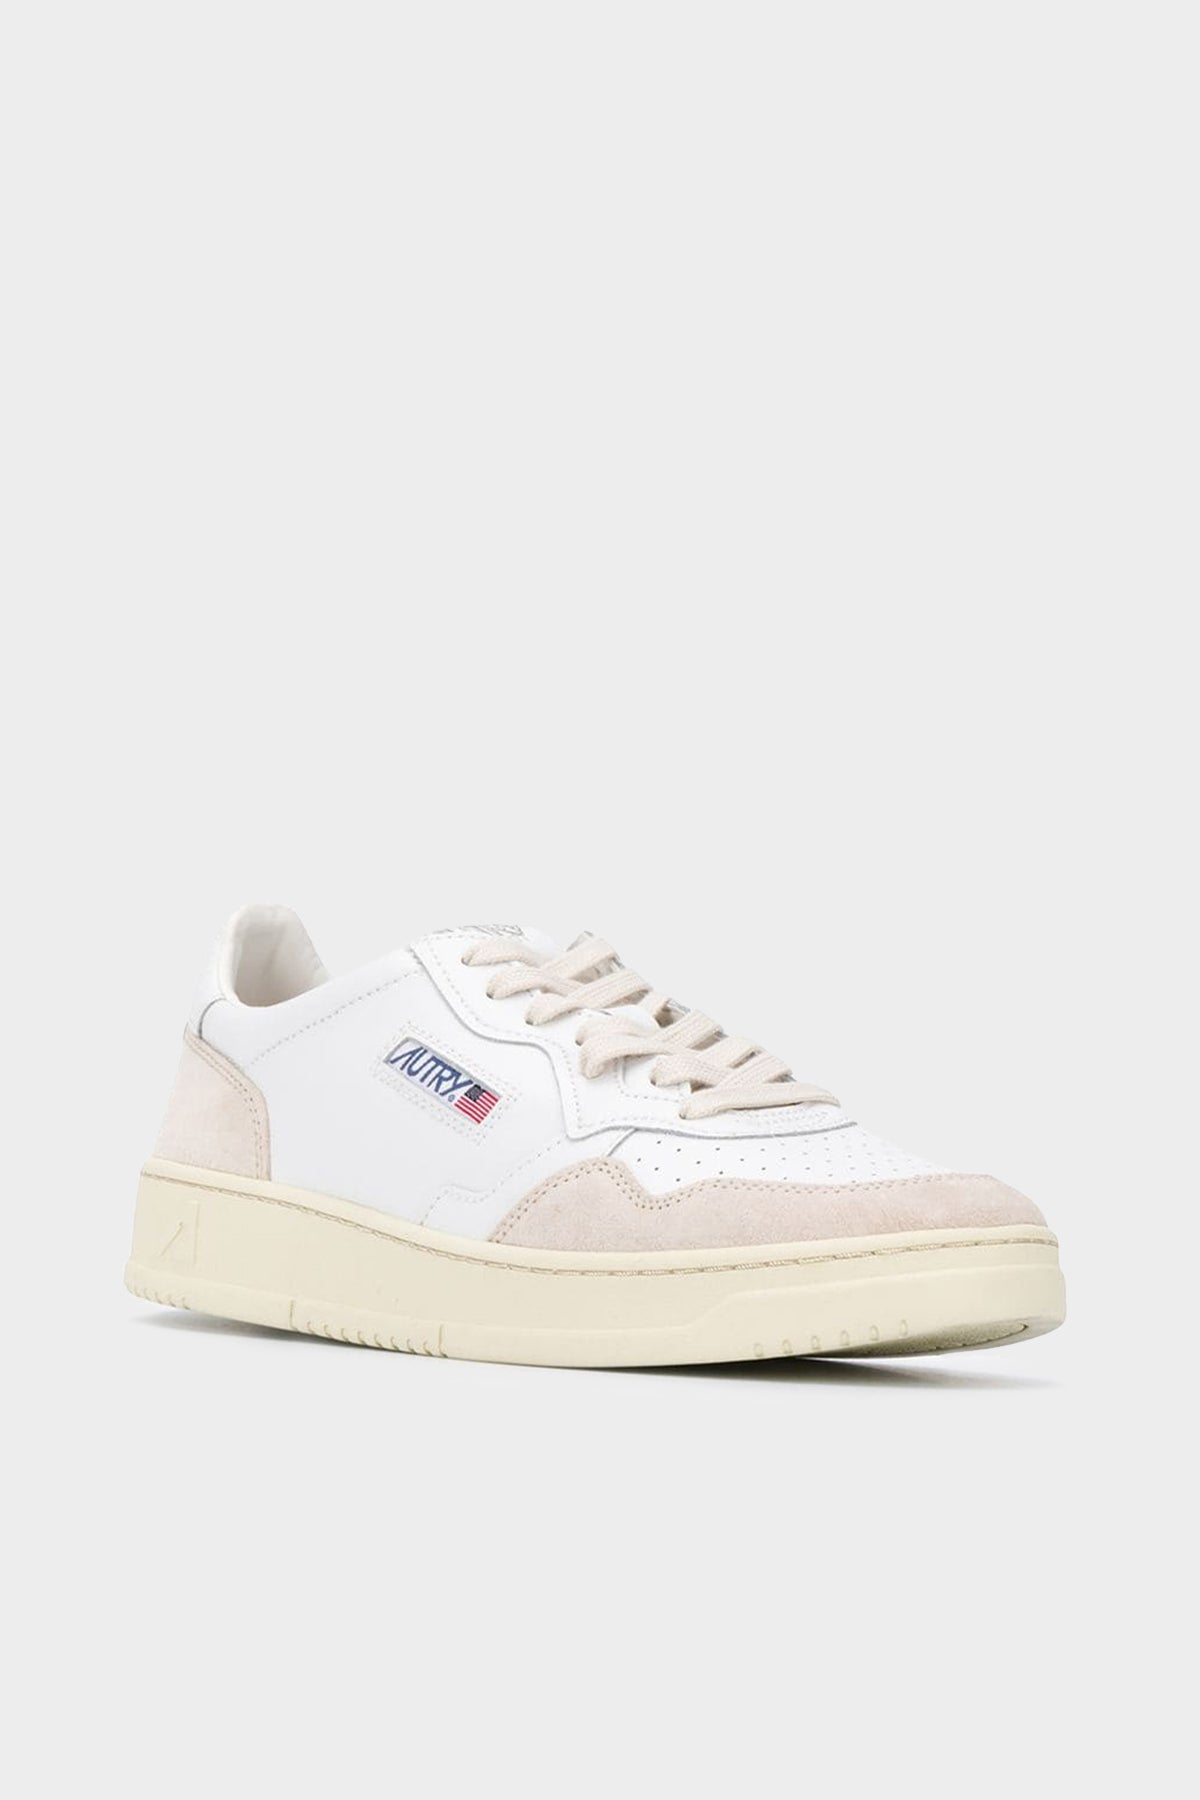 Medalist Low Suede Leather Men Sneaker in White - shop-olivia.com